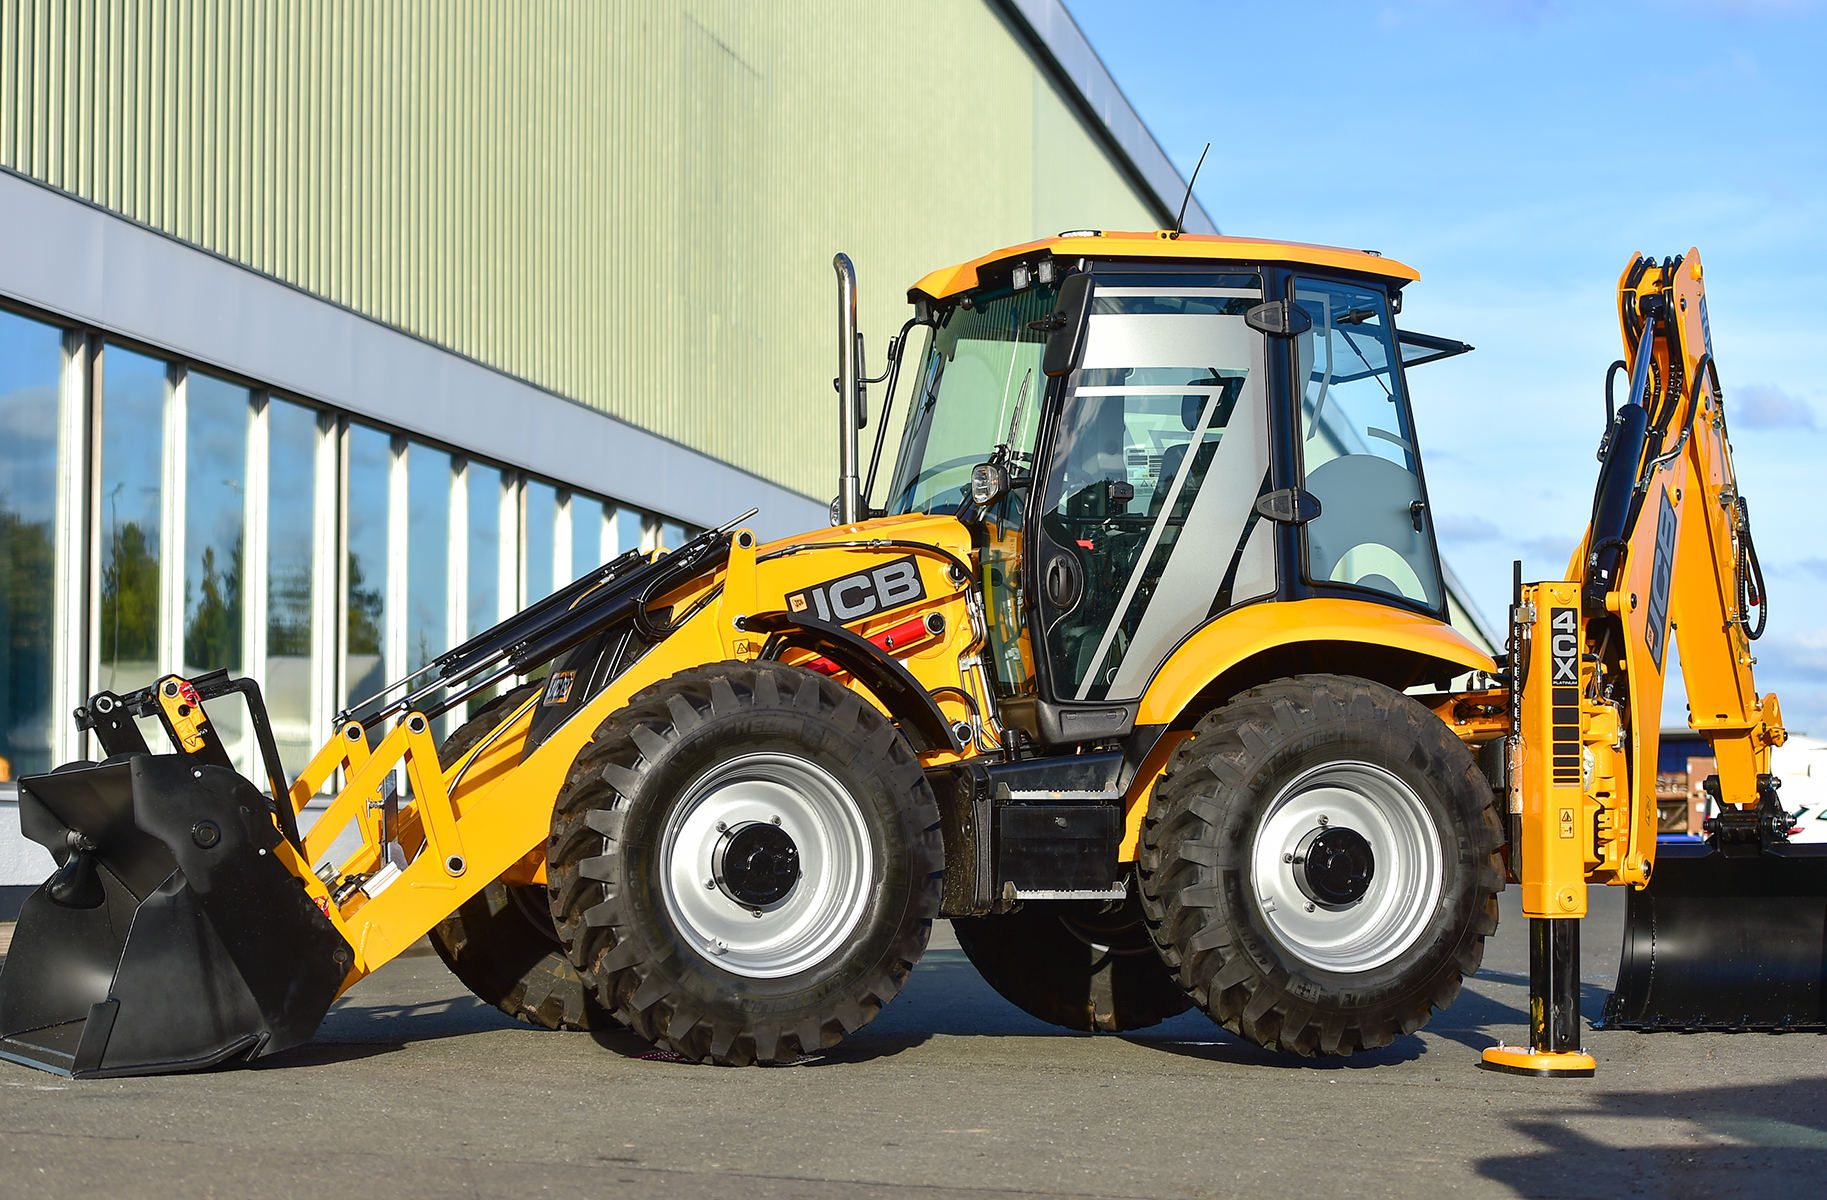 Special edition backhoes launched